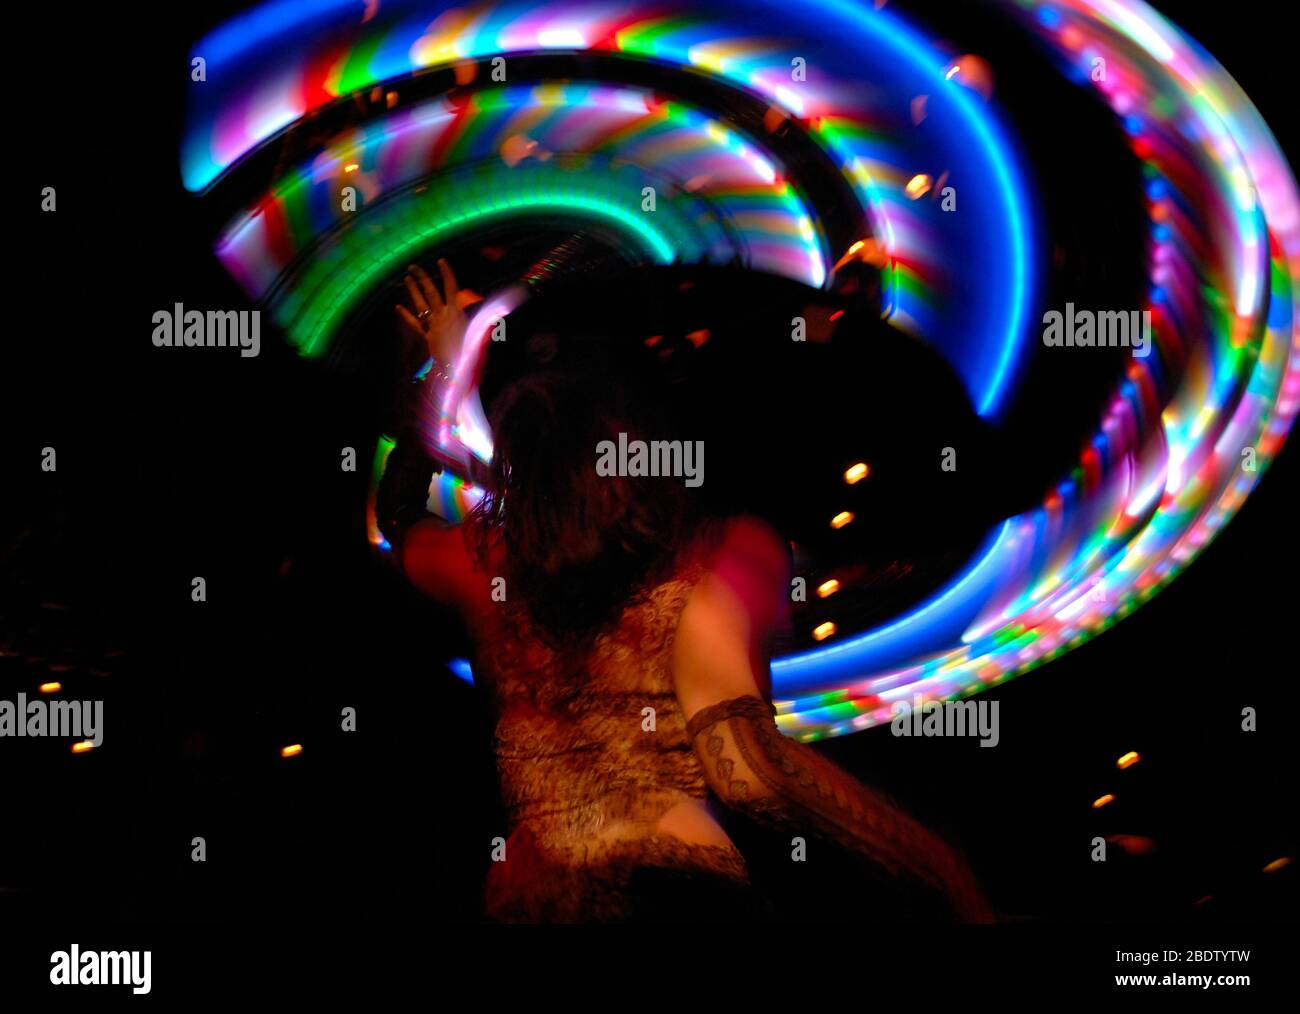 Multi Coloured Hula Hoop Lights Twirled in Circular Motion by Dancer in  Lace with Slow Shutter Speed Causing Intentional Blur Photography Stock  Photo - Alamy